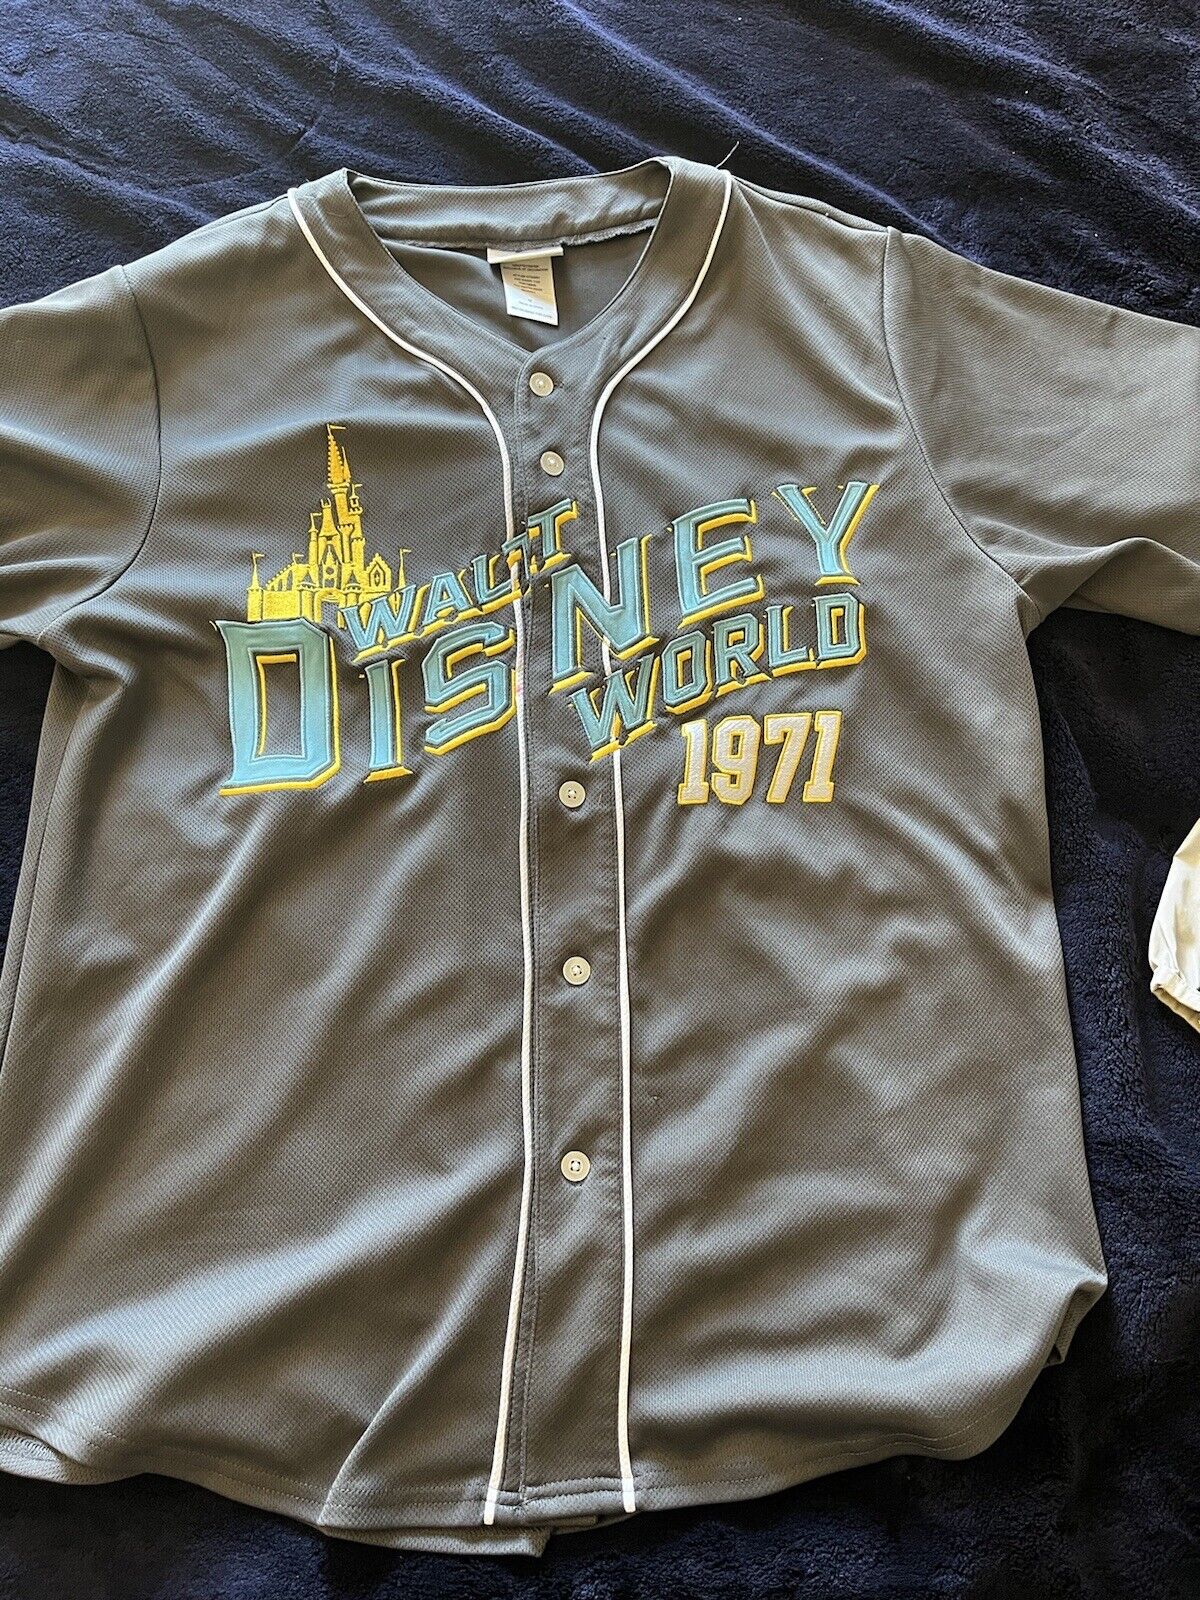 Vintage 1971 walt disney baseball jersey has a small stain but great condition